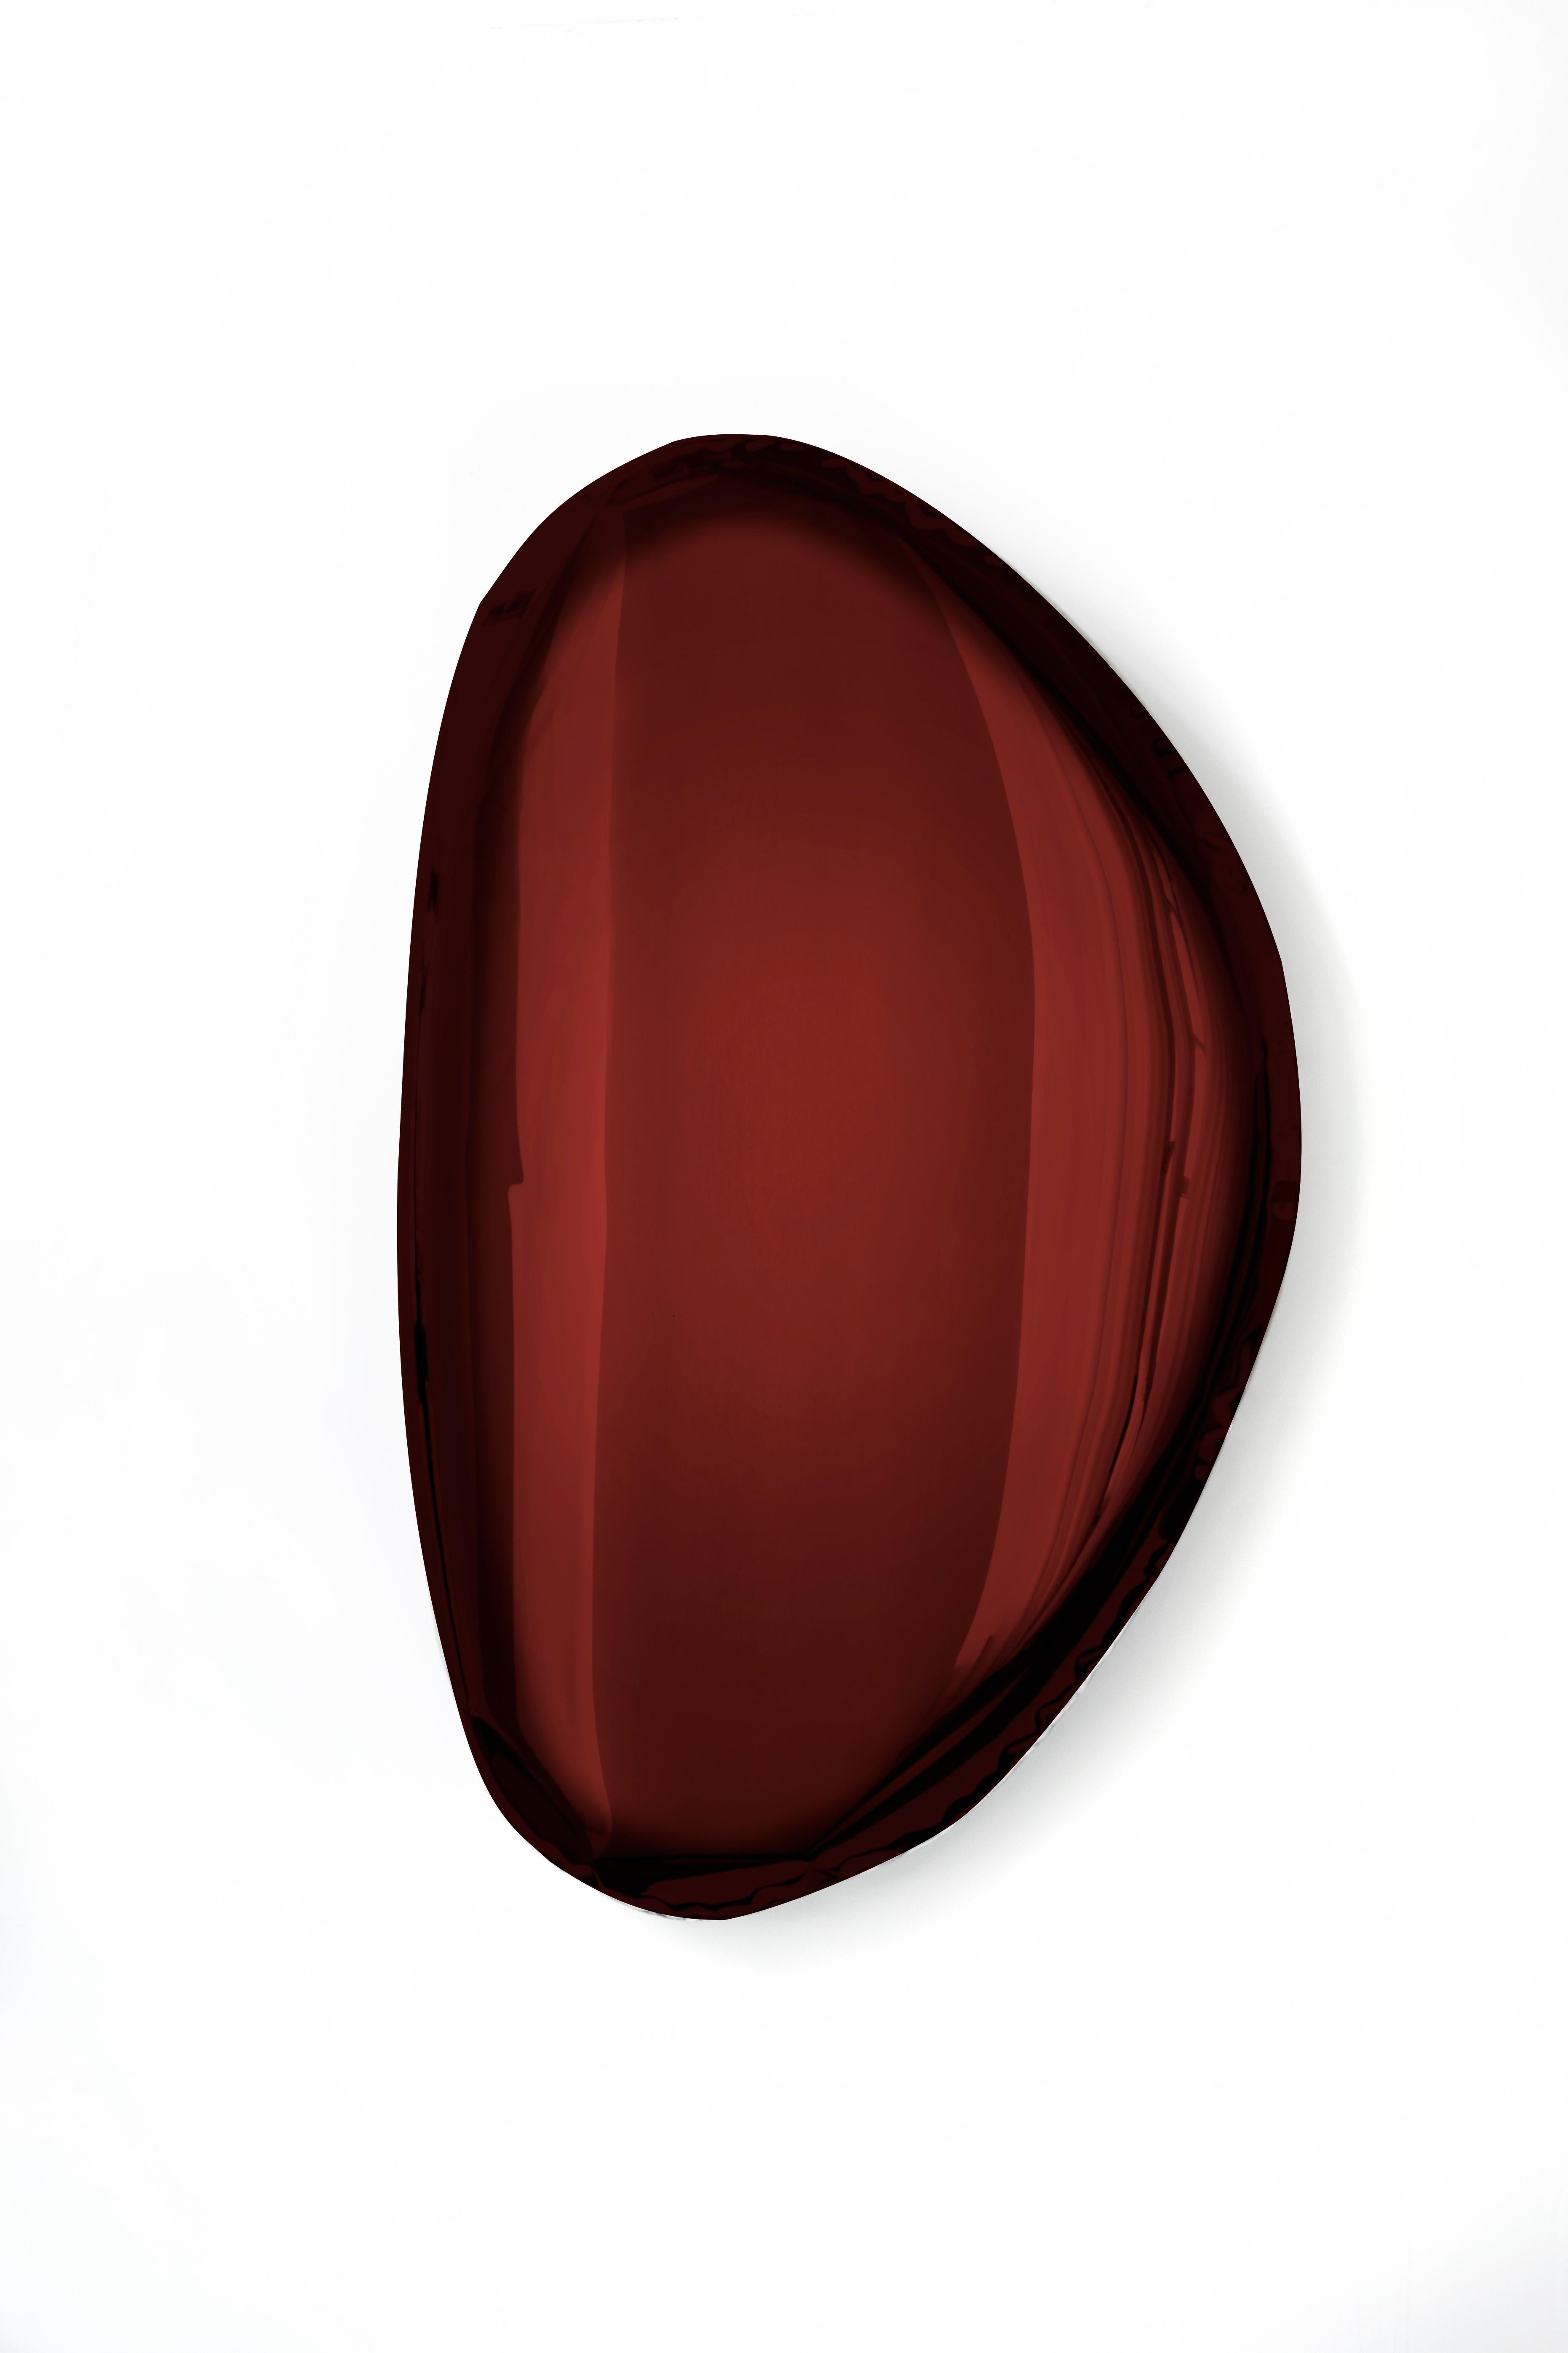 Contemporary Mirror Tafla O5 Rubin Red, in Polished Stainless Steel by Zieta For Sale